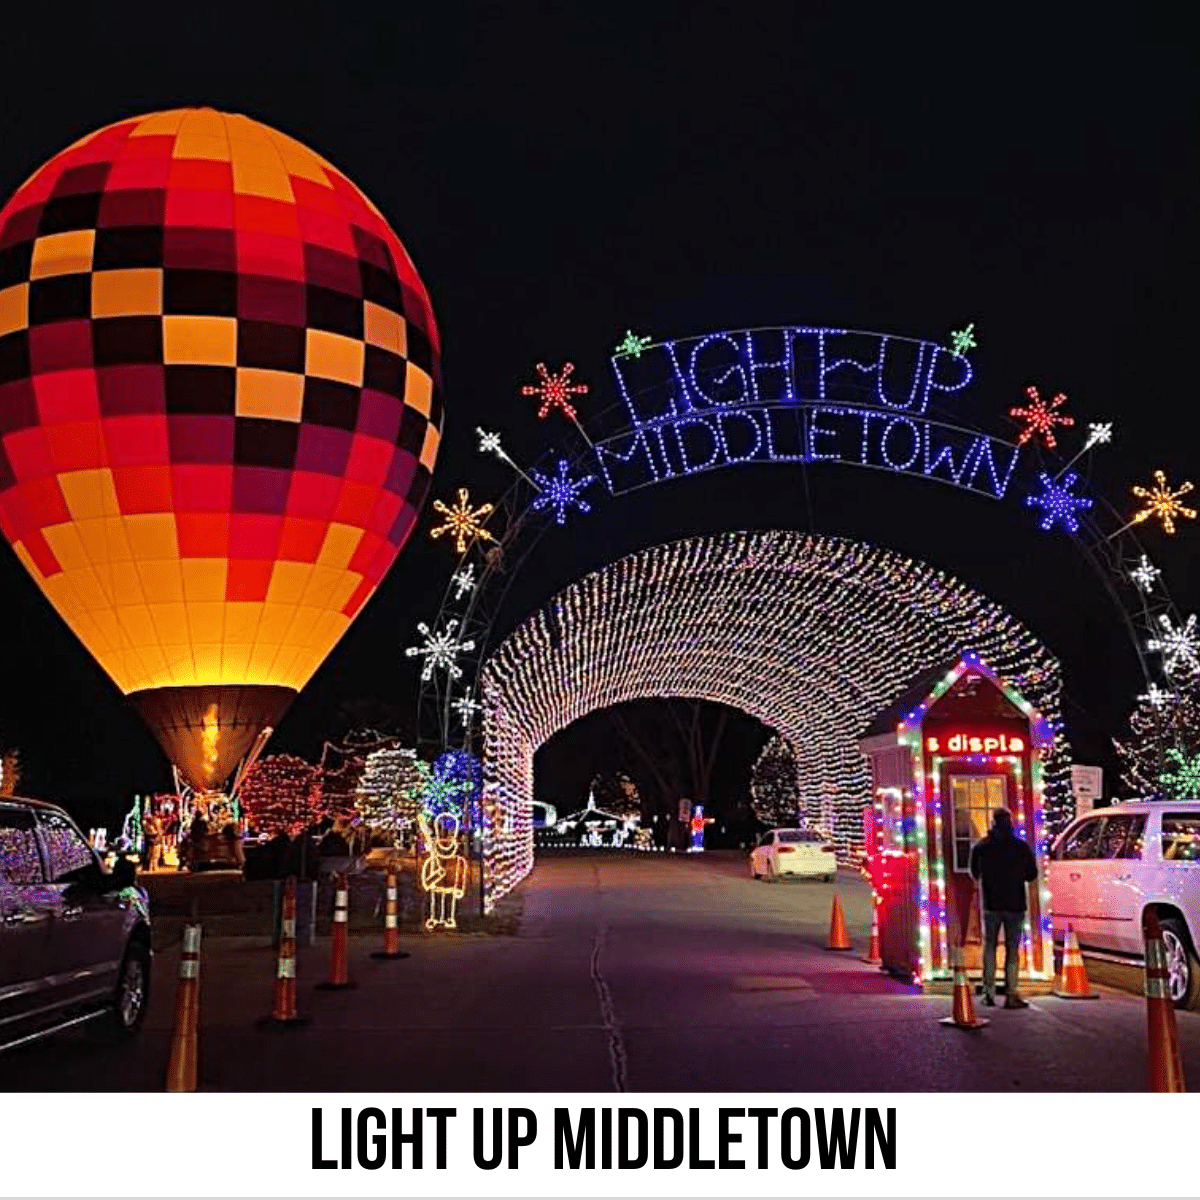 square image with a phot of Light Up Middletown entrance with a lit tunnel and a glowing hot air balloon. Image courtesy of Light Up Middletown